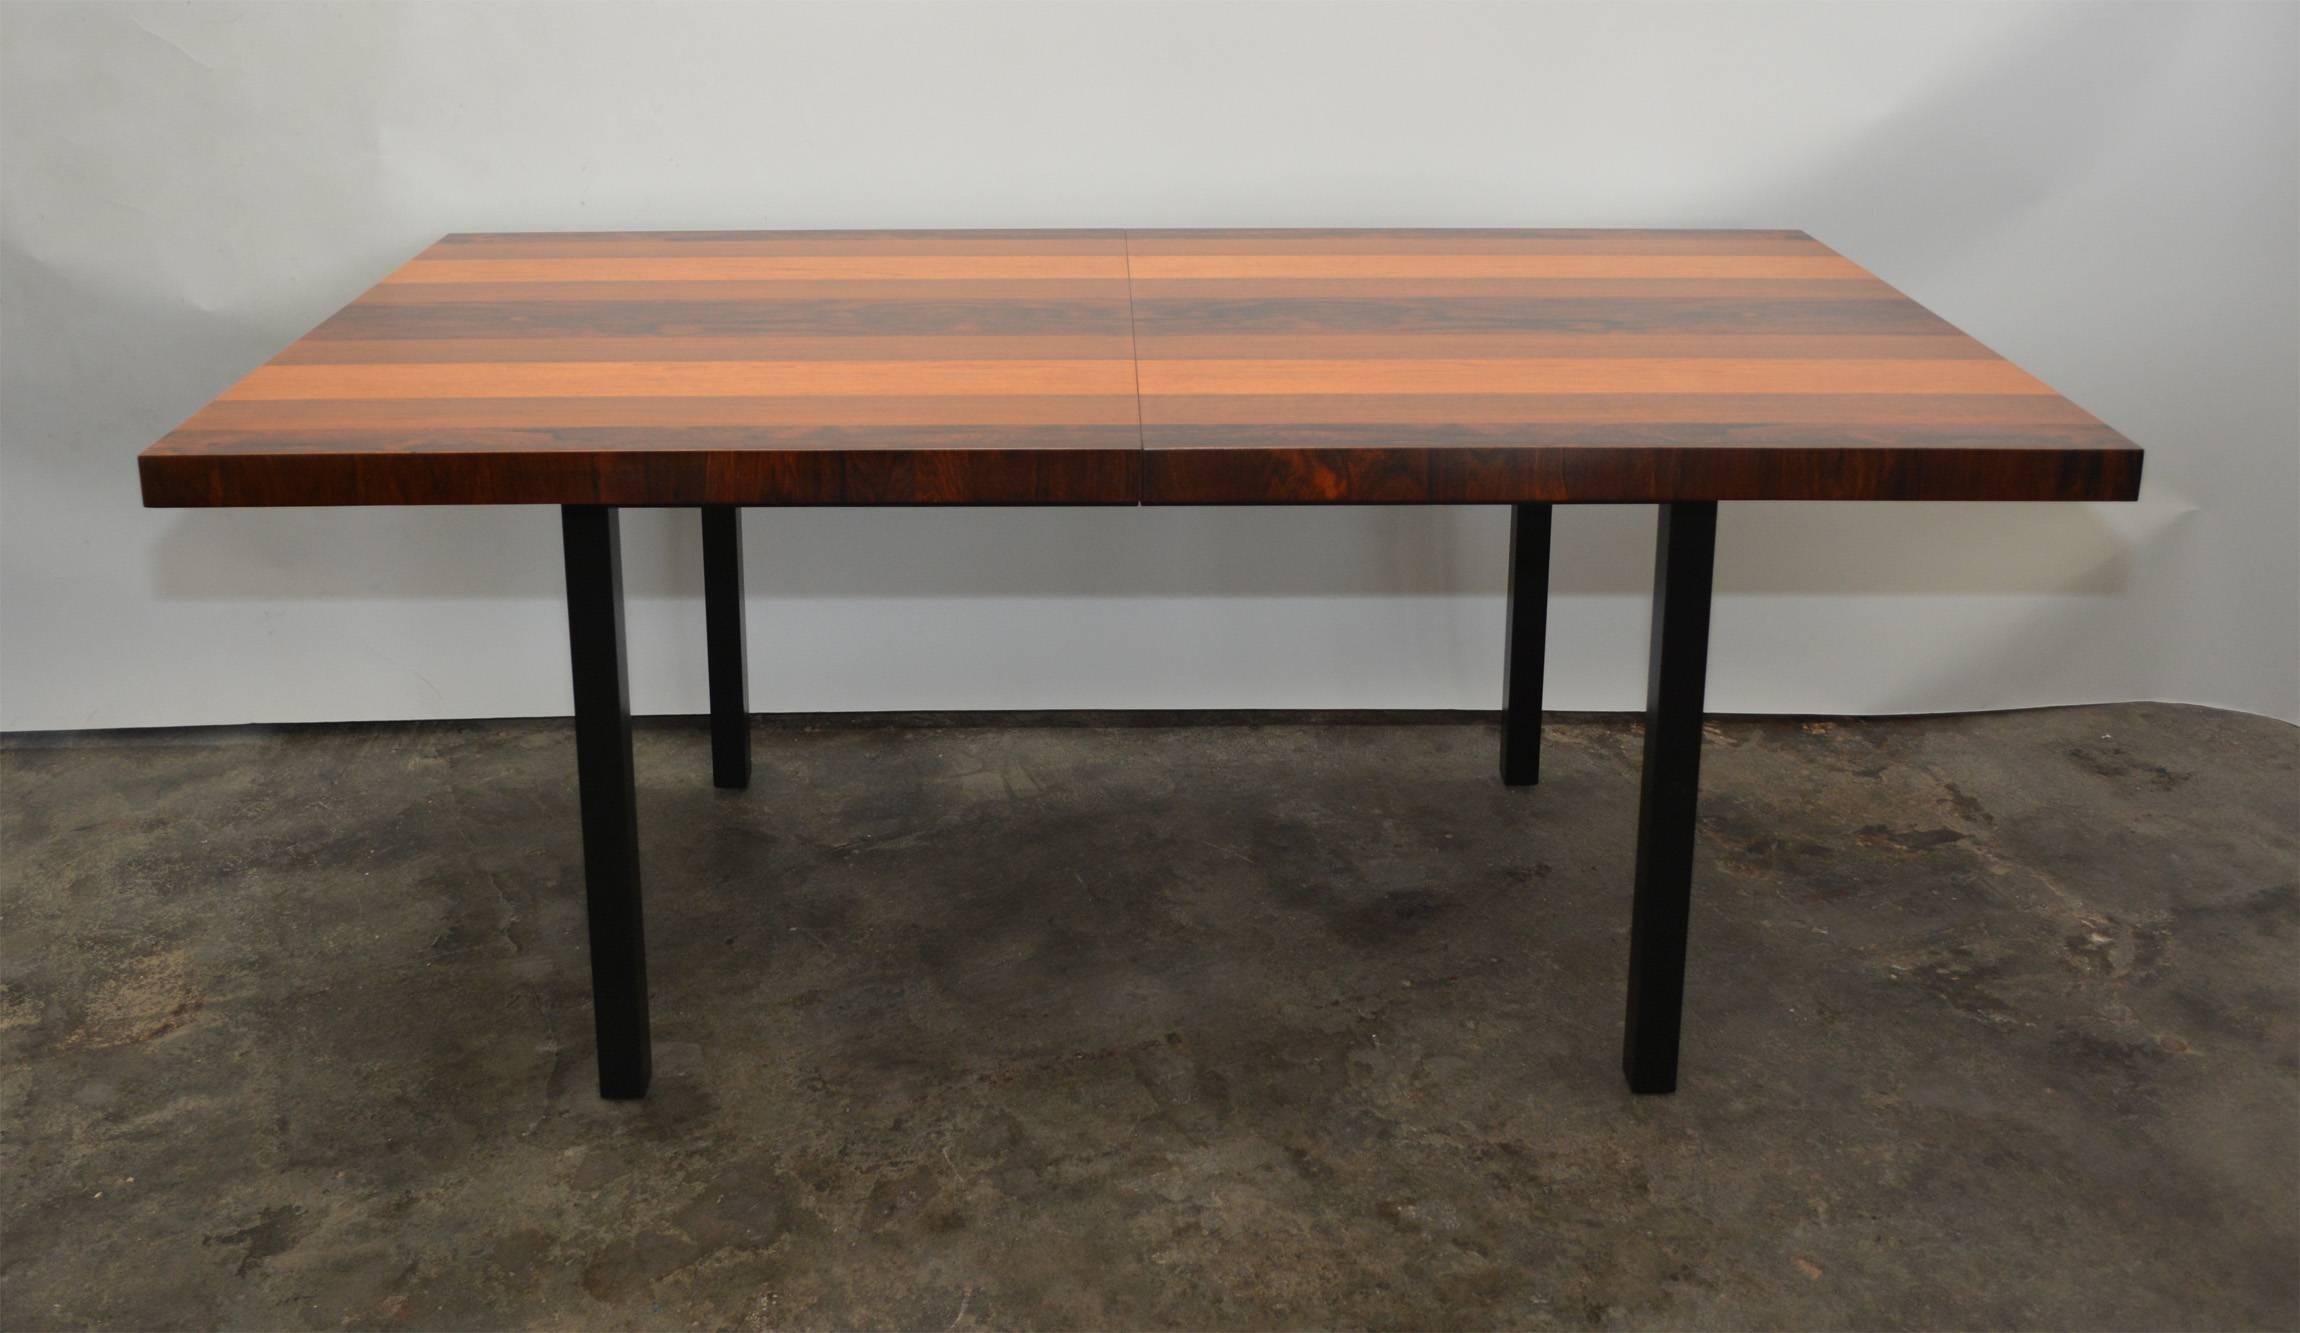 This large dining table has a banded top of rosewood, walnut and ash. The edges of the table are in rosewood. The base is a satin black. The table has been refinished. There are two 20